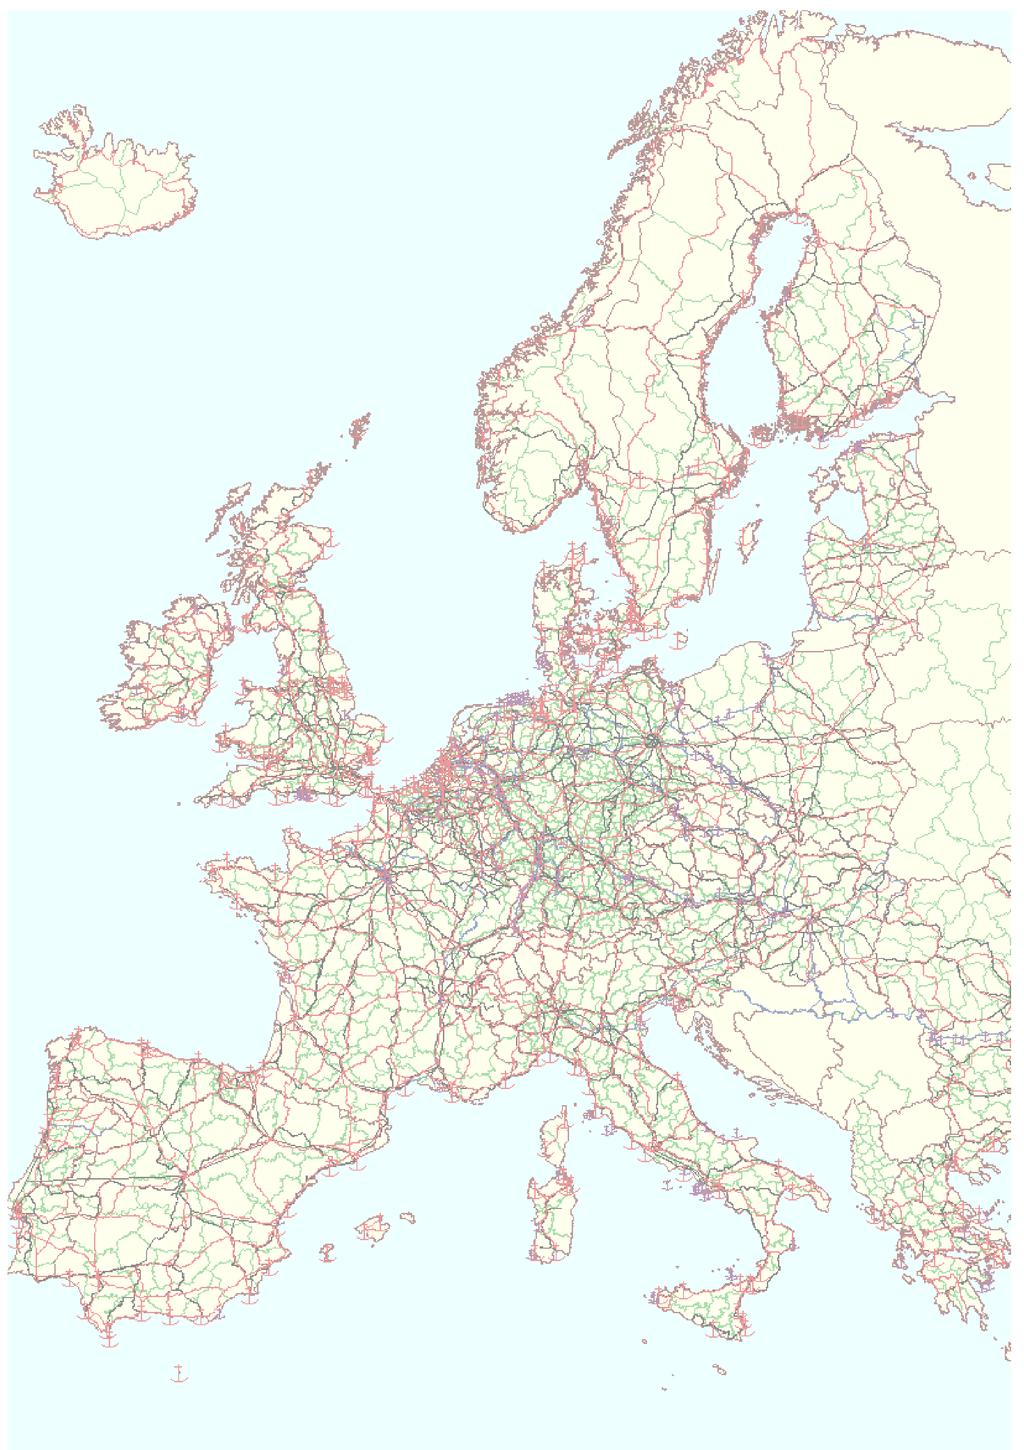 T E N - I n v e s t Transport Infrastructure Costs and Investments between 1996 and 2010 on the Trans-European Transport Network and its Connection to Neighbouring Regions, including an Inventory of